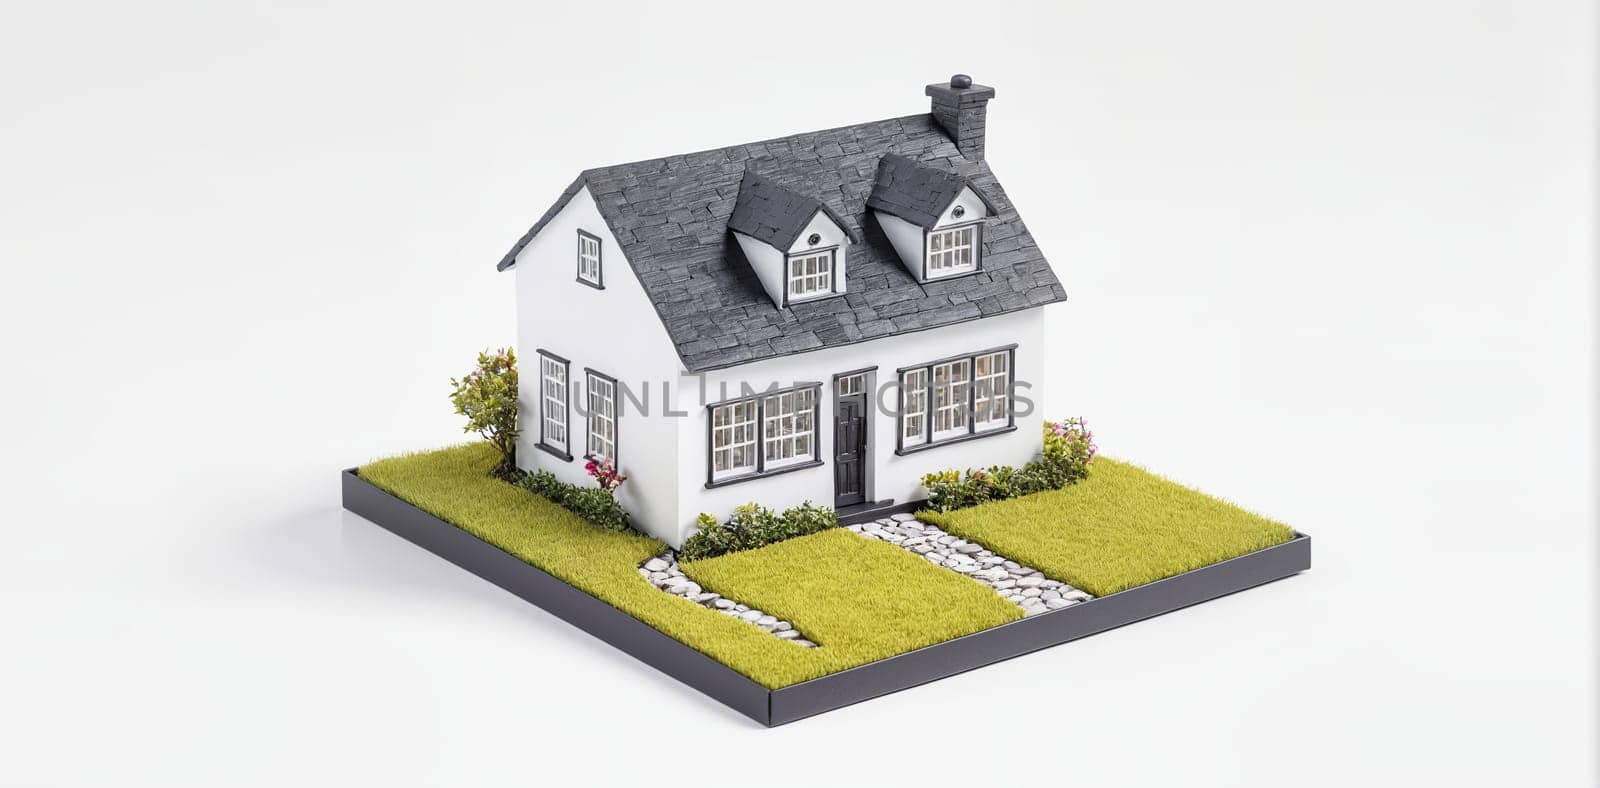 3D model of a house on a white background with a shadow by Andre1ns